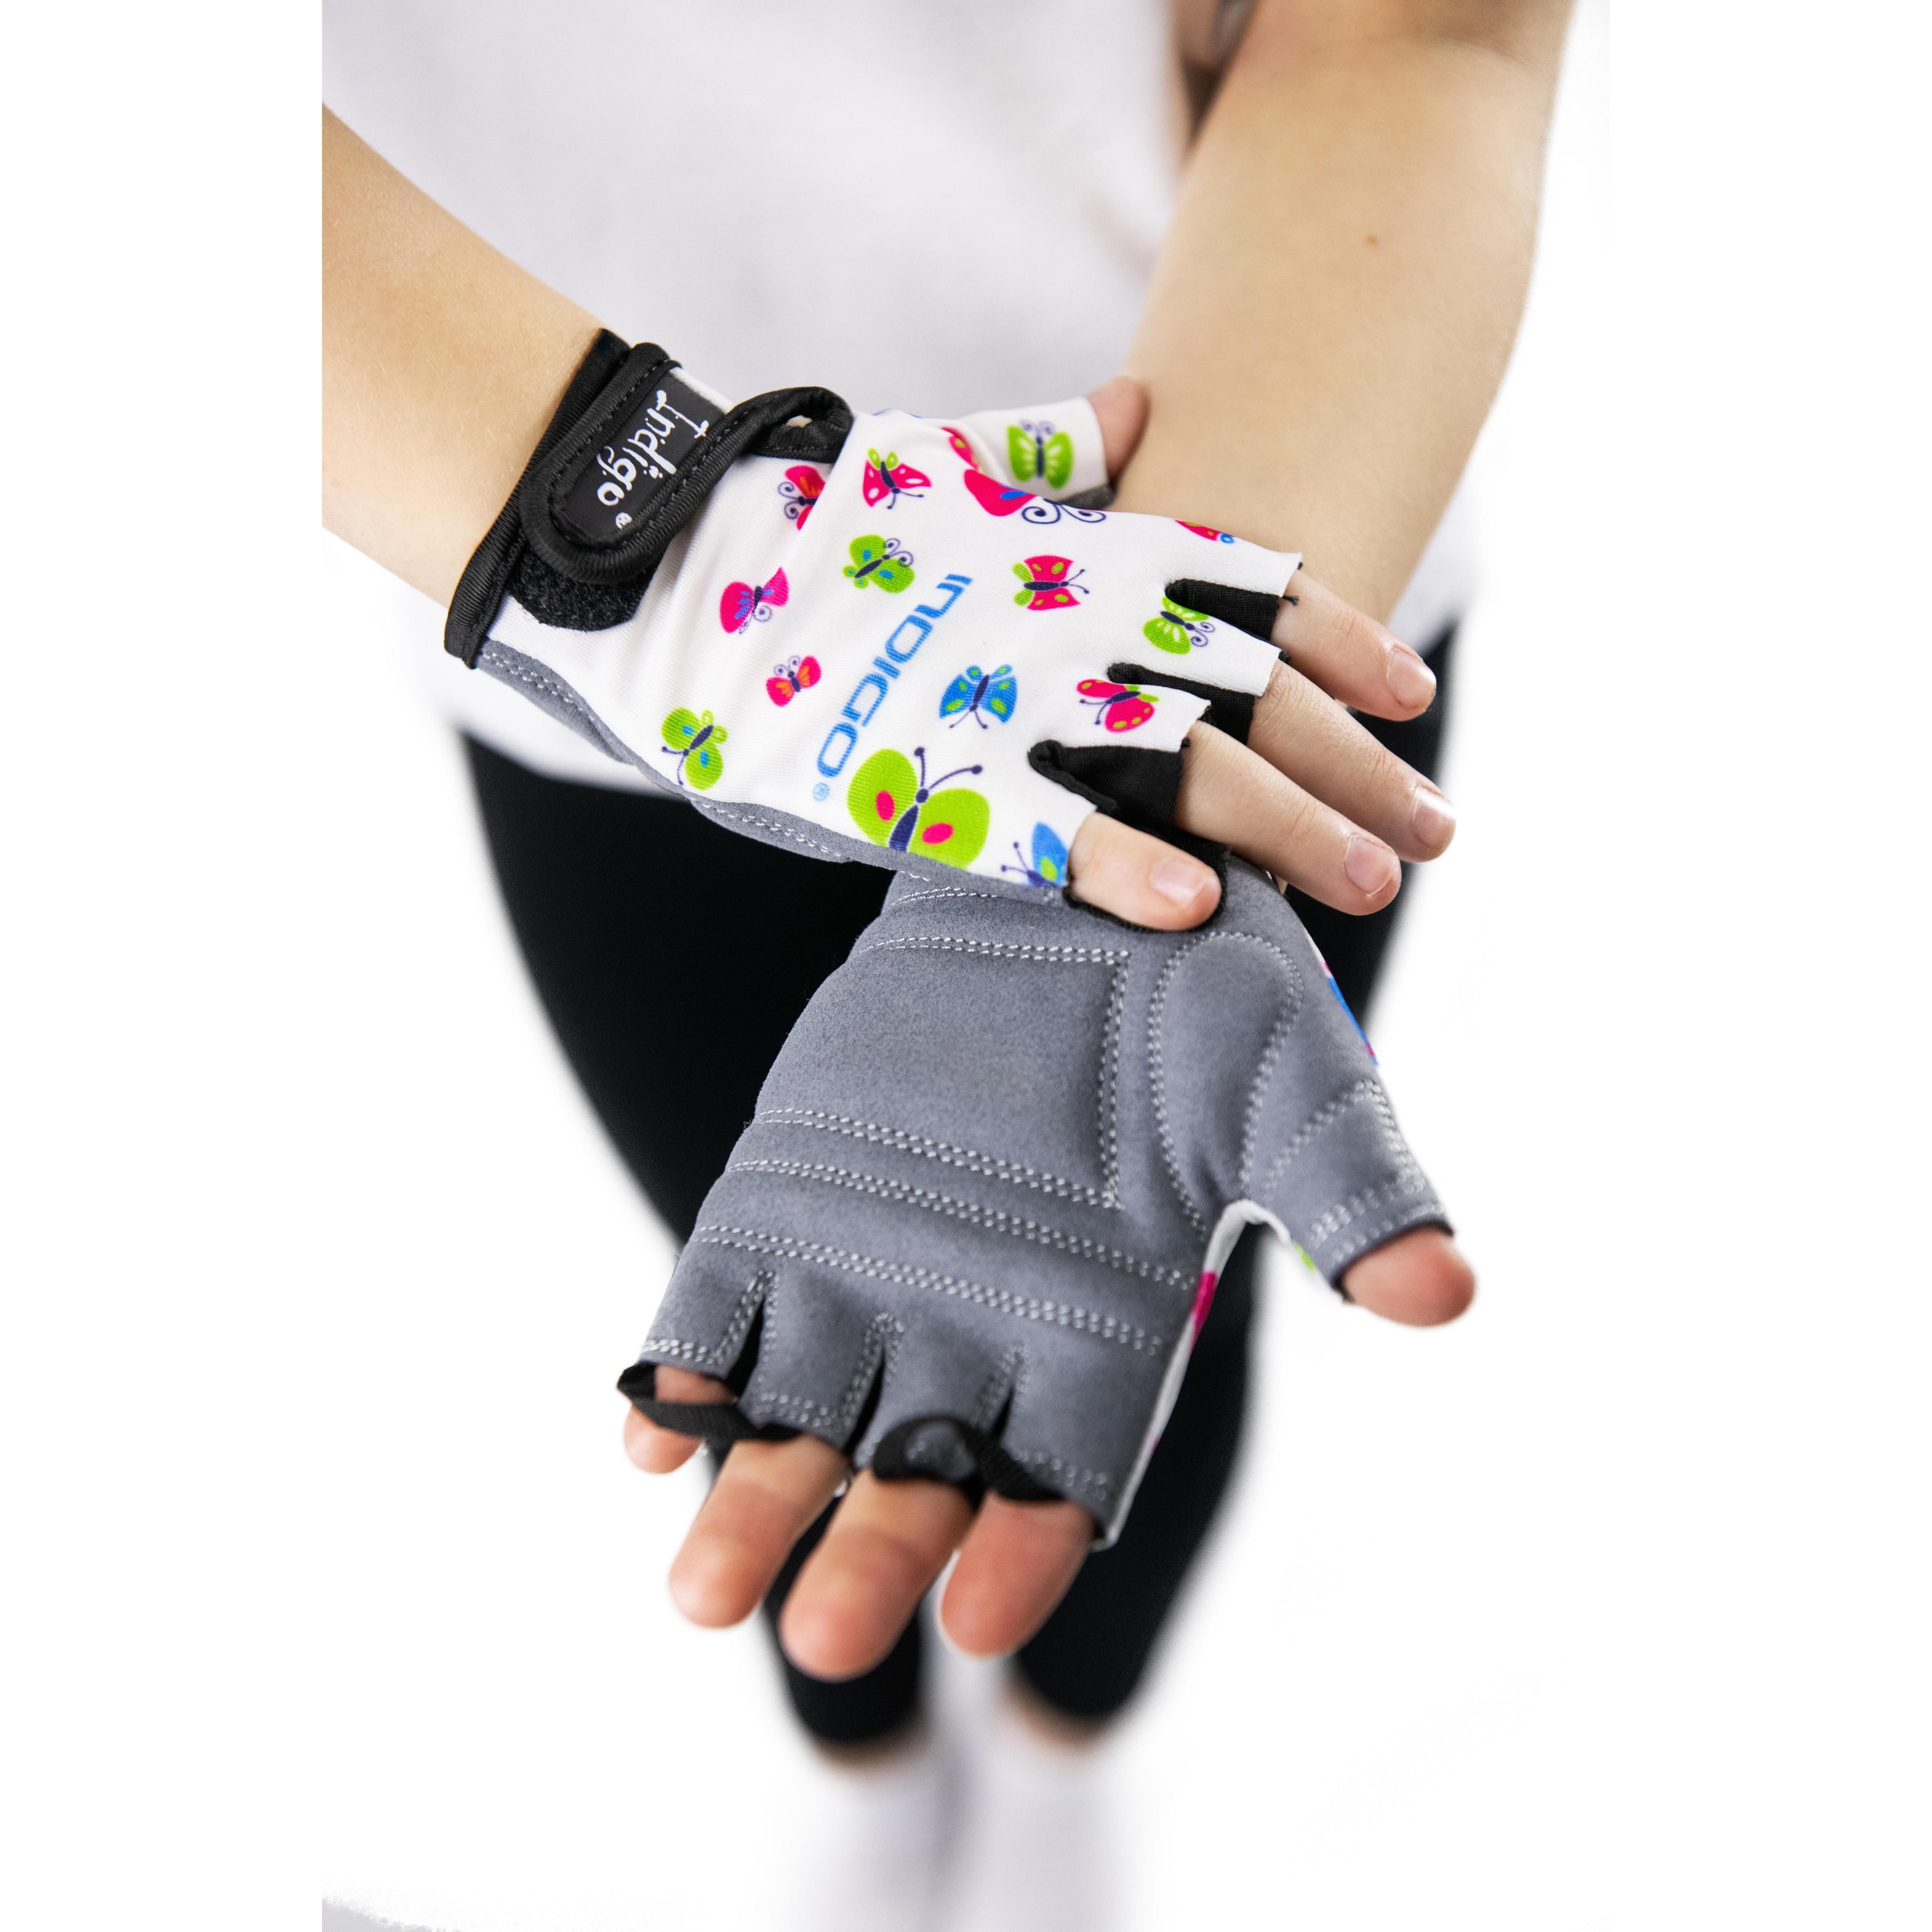 Guantes Ciclismo Infantil BUTTERFLY INDIGO Talle XS Blanco